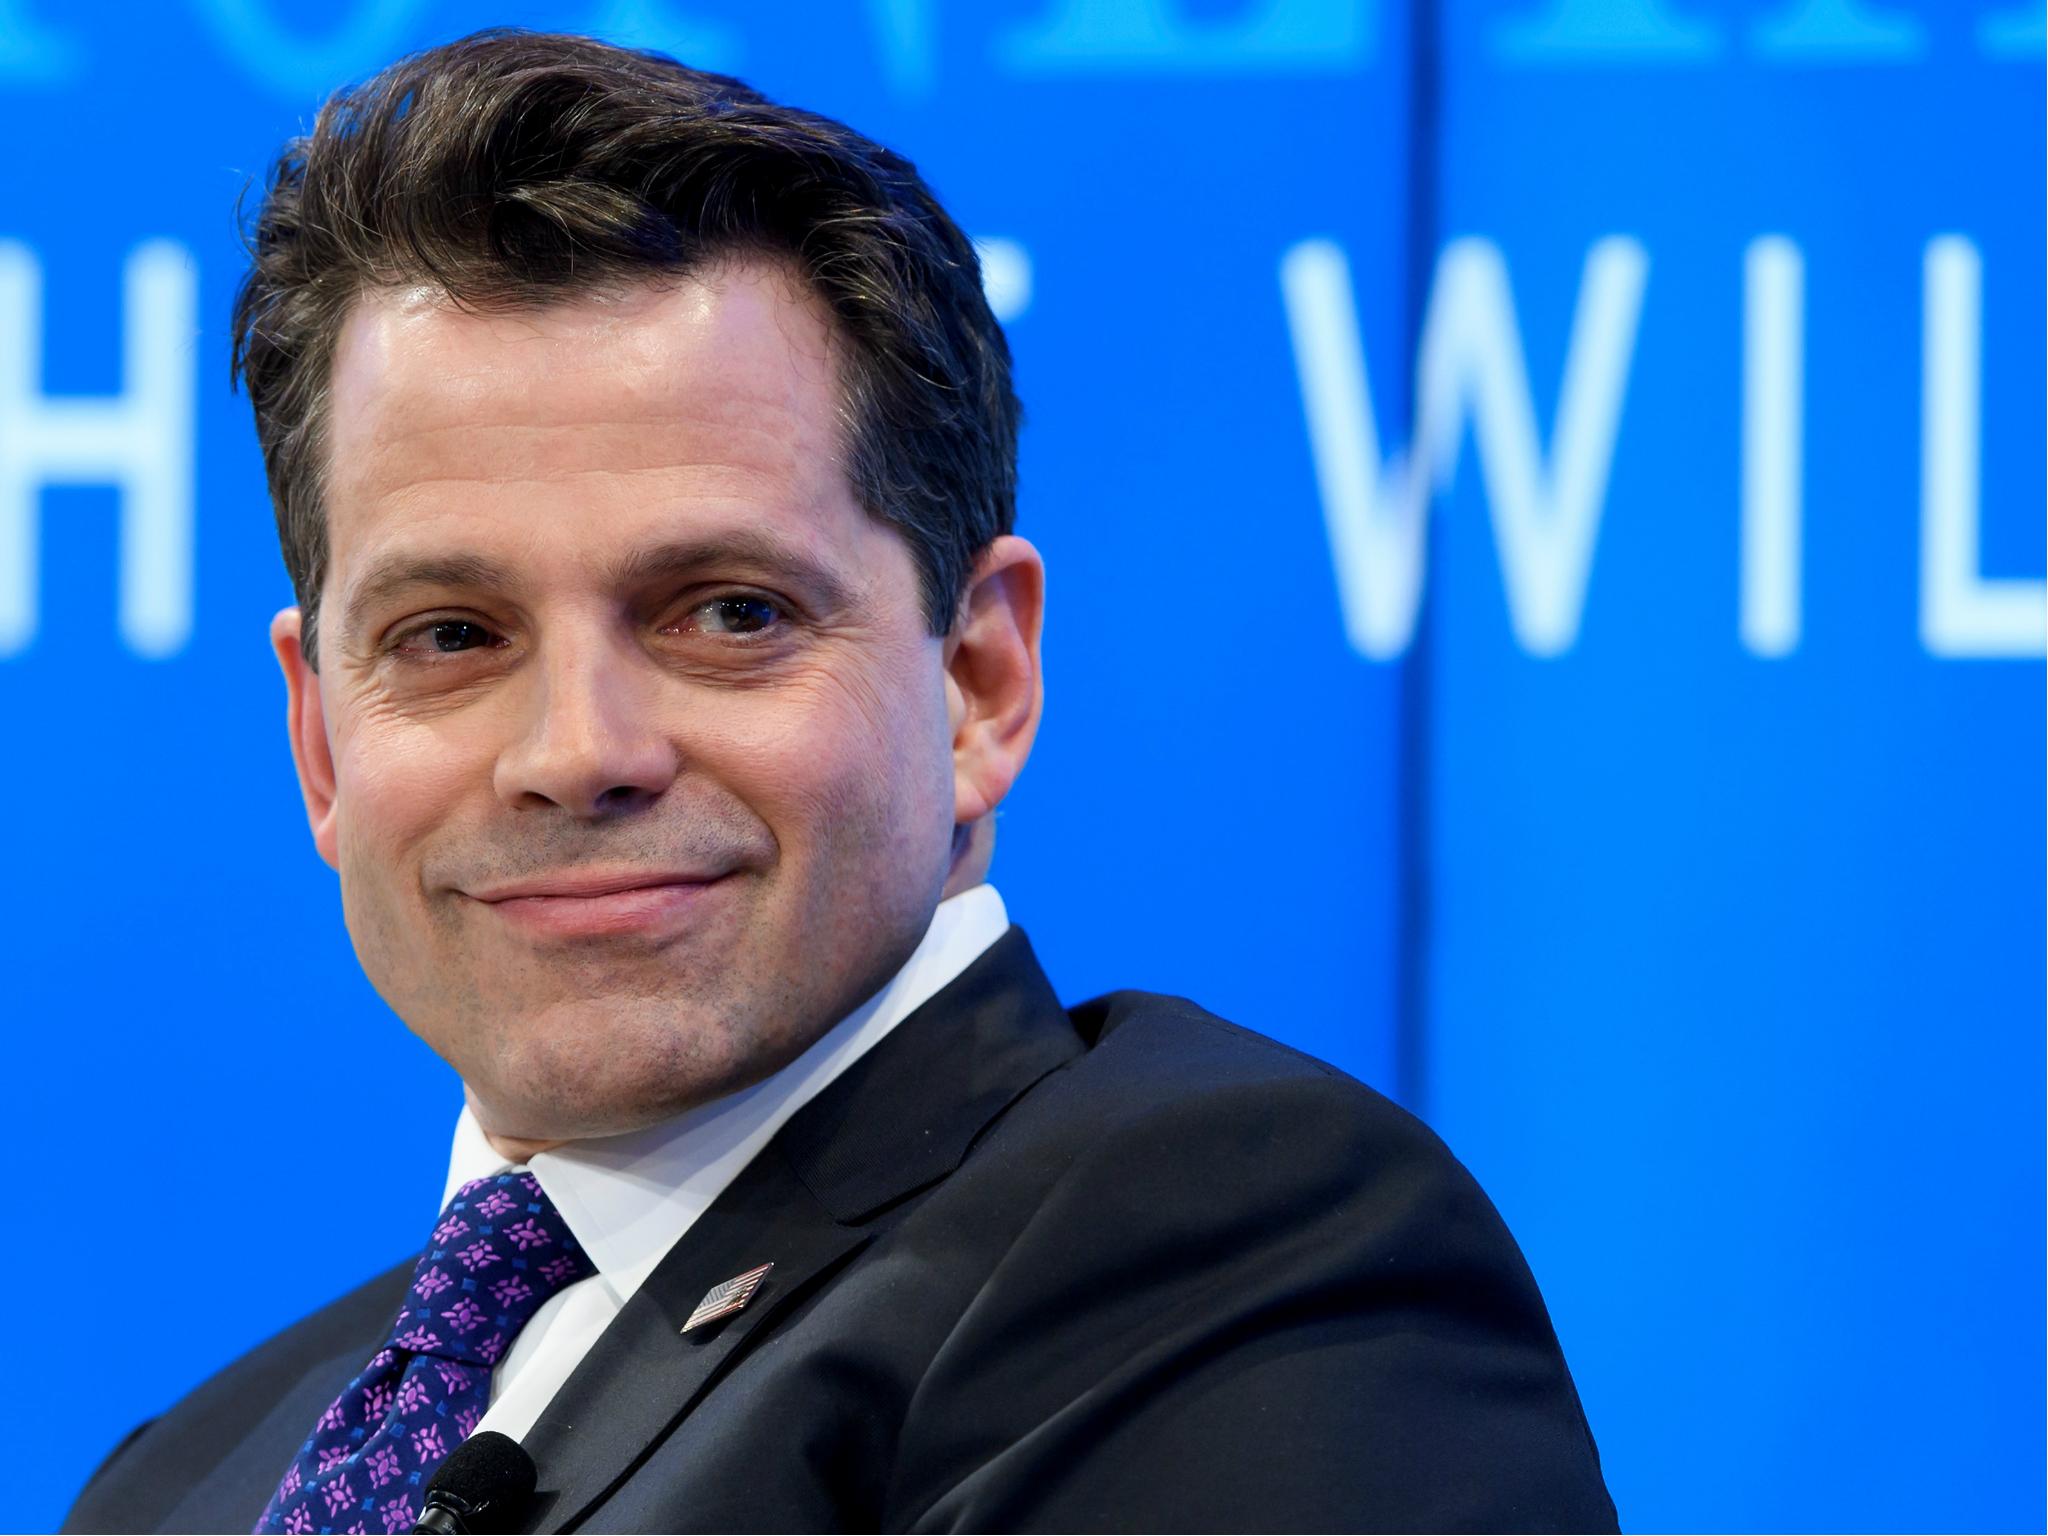 Mr Scaramucci said he 'loves the President' and criticised 'disconnect' with the media